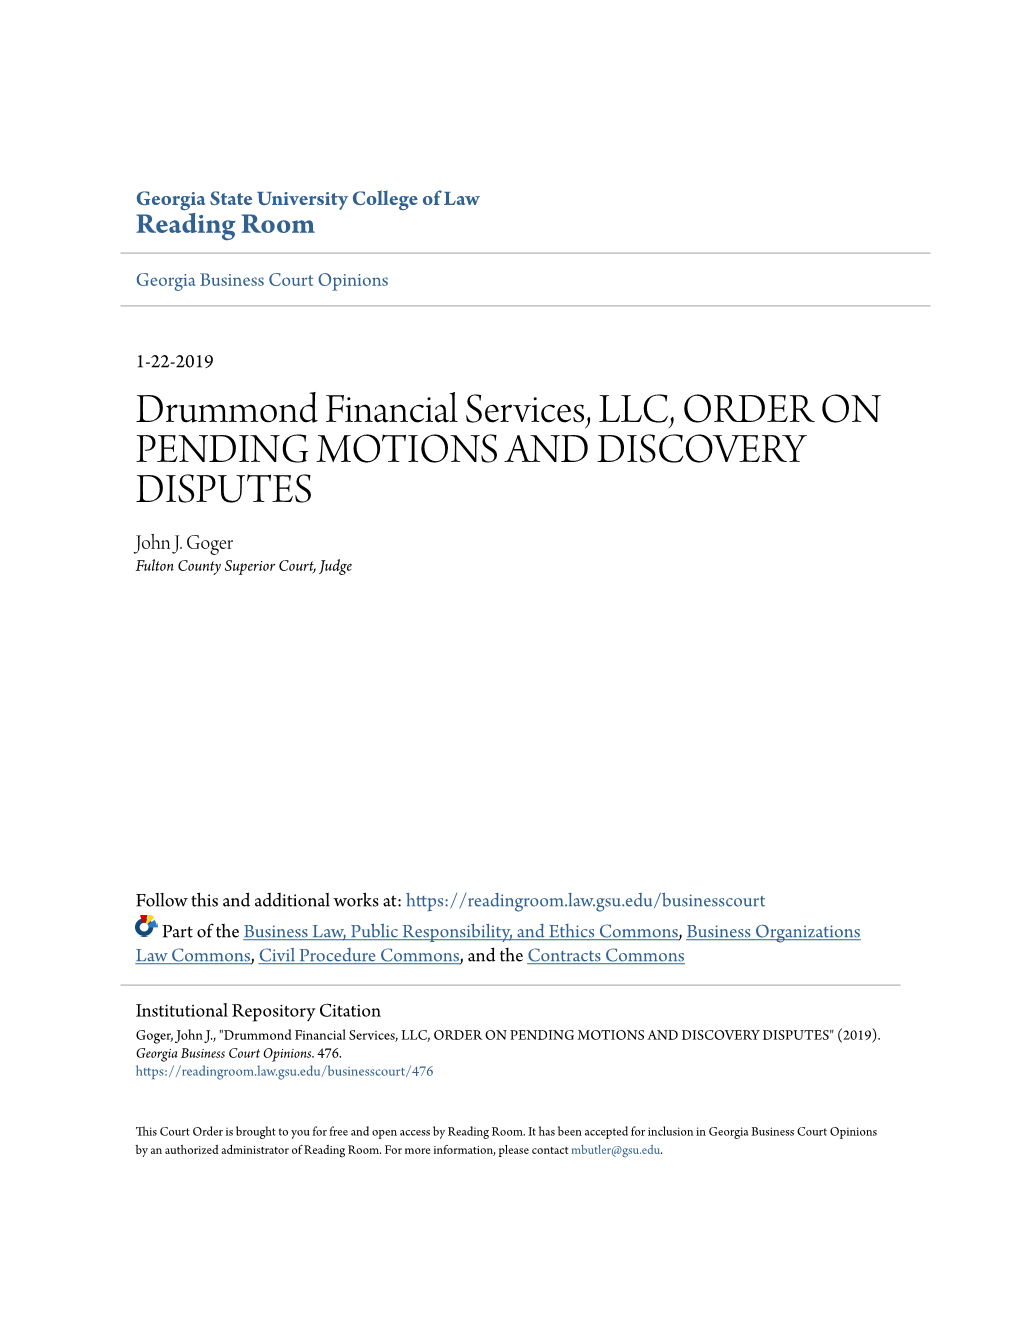 Drummond Financial Services, LLC, ORDER on PENDING MOTIONS and DISCOVERY DISPUTES John J